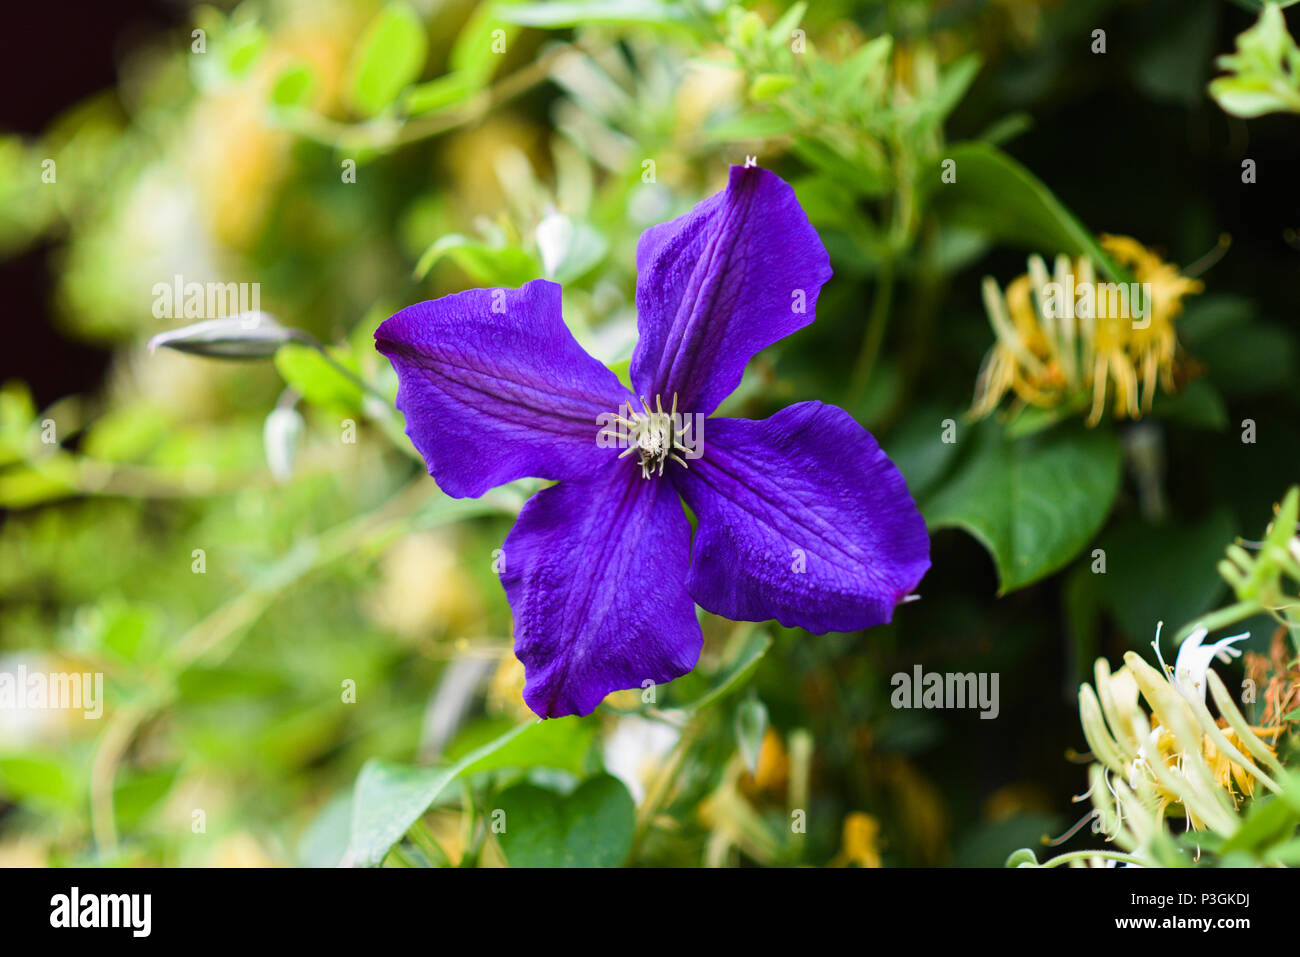 Blooming purple clematis in the garden during the summer season. Stock Photo